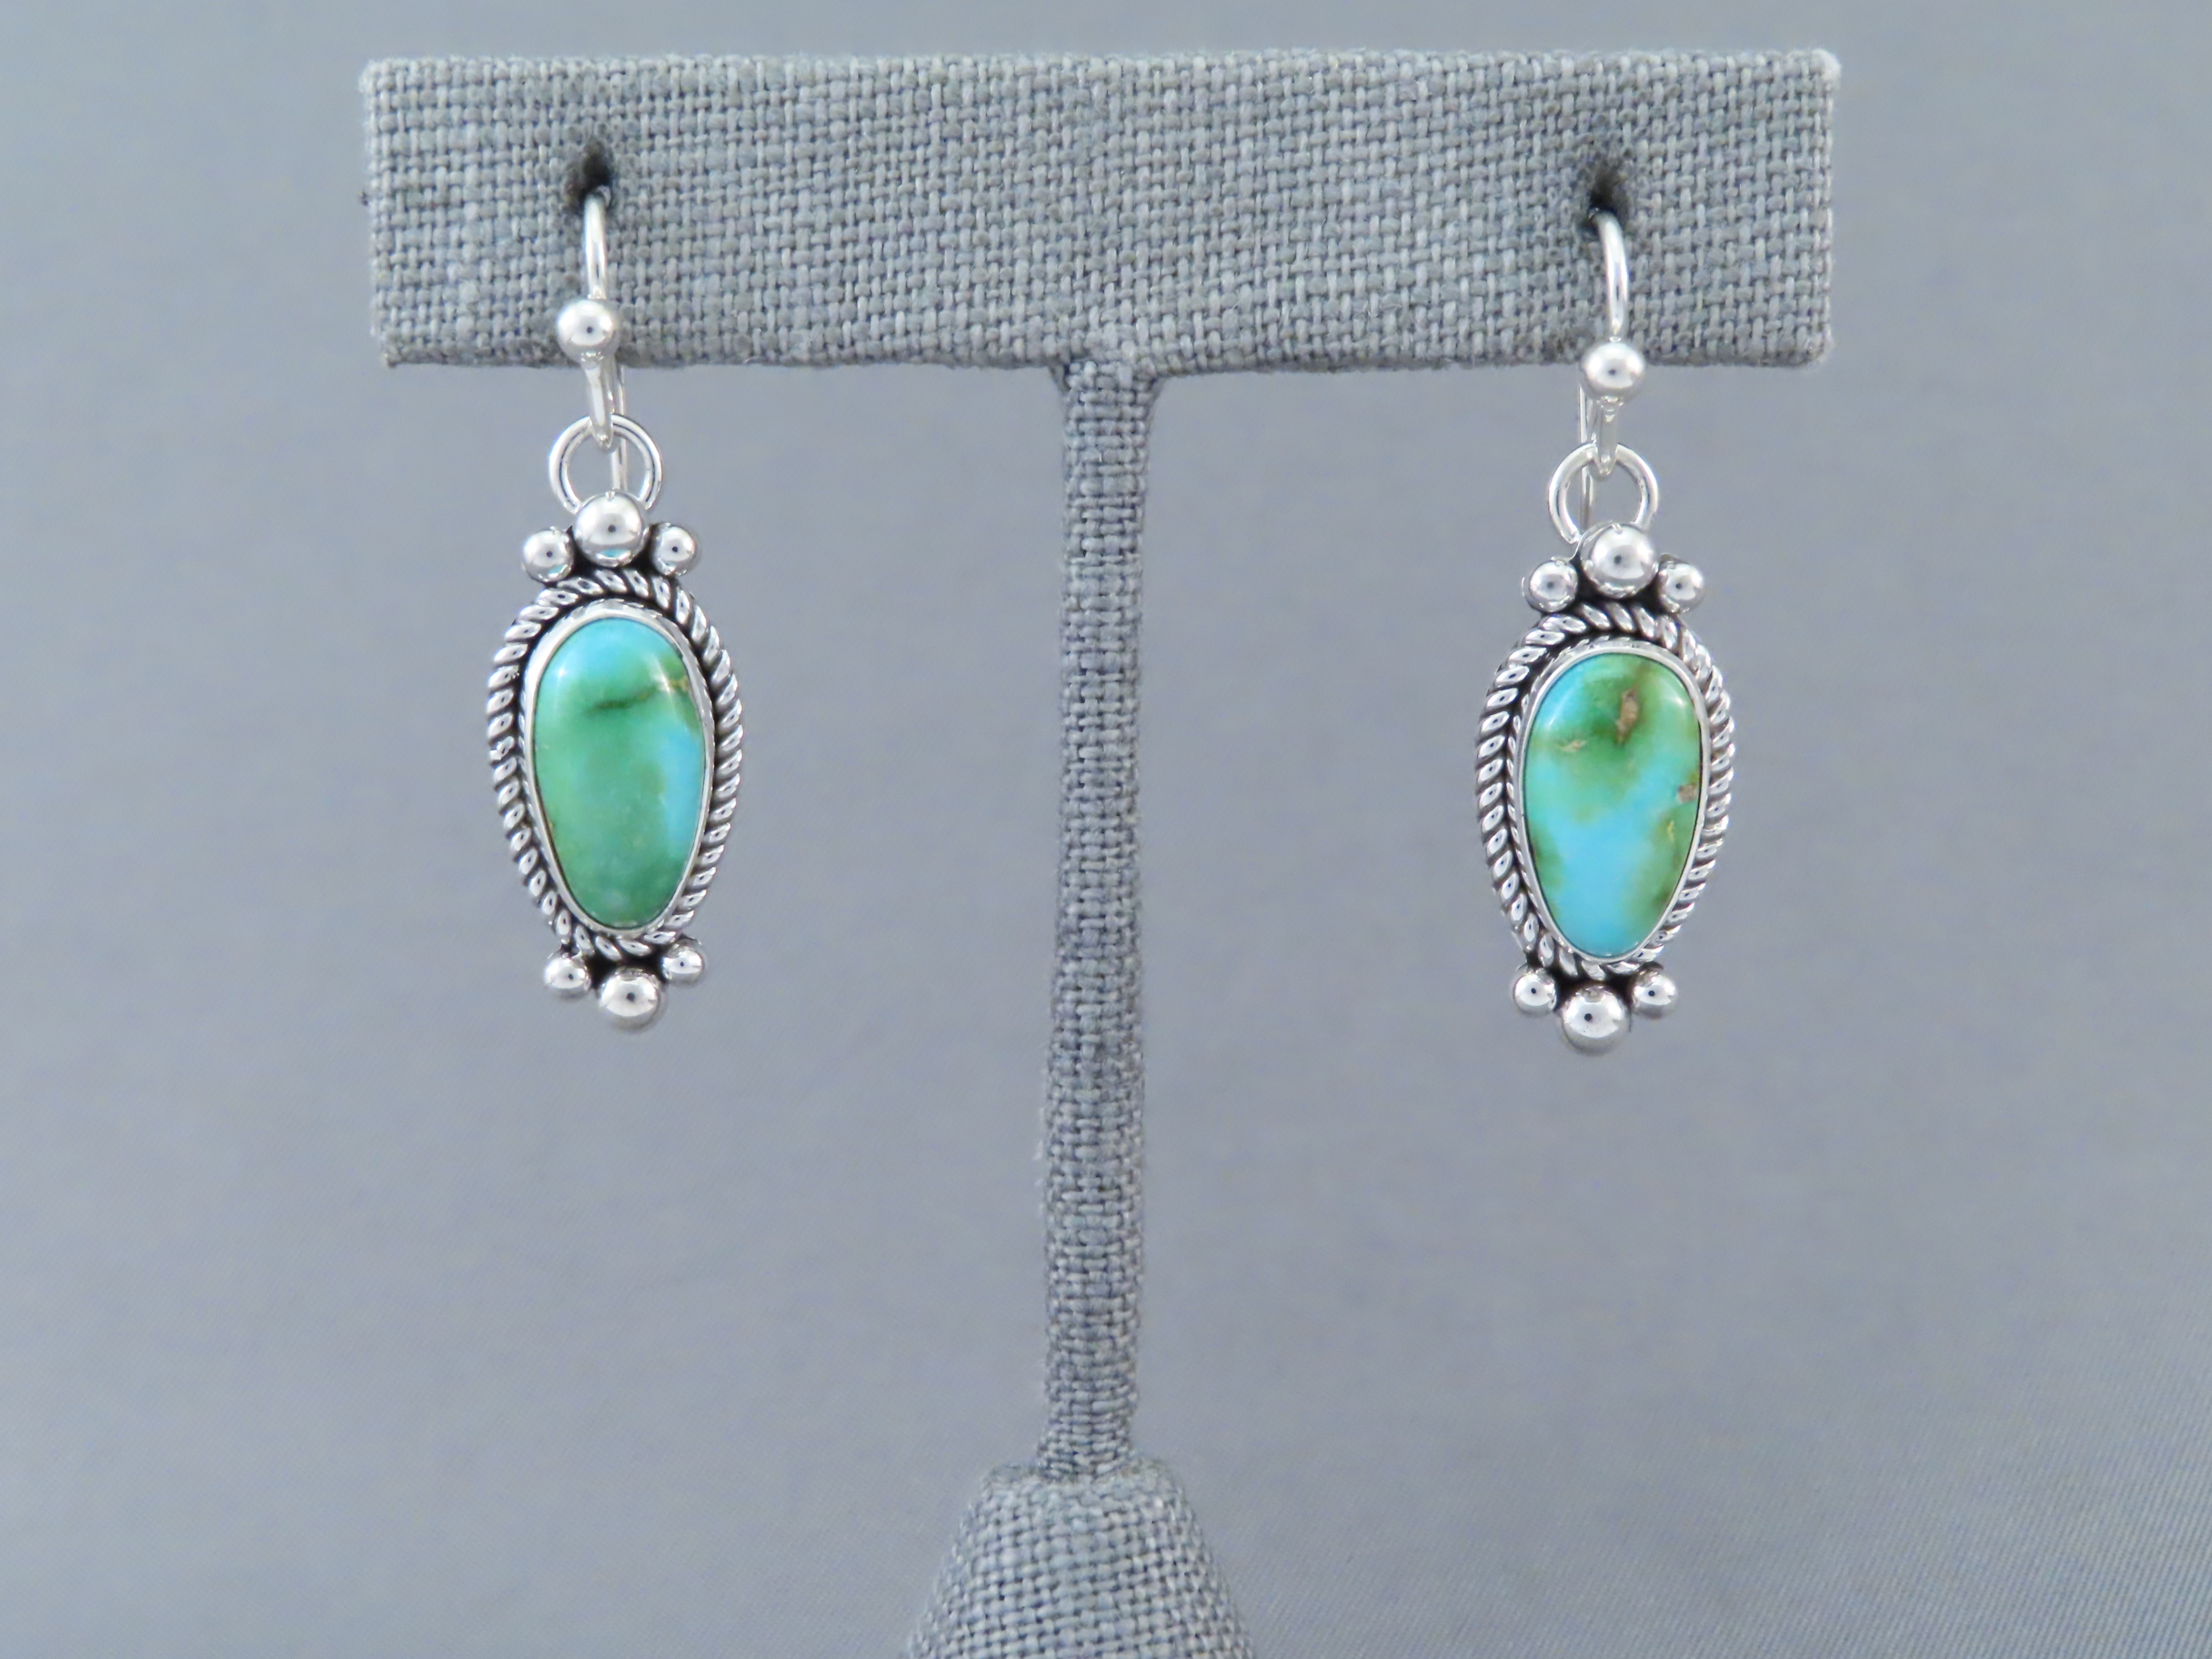 Earrings with Sonoran Turquoise by Artie Yellowhorse - Navajo Jewelry